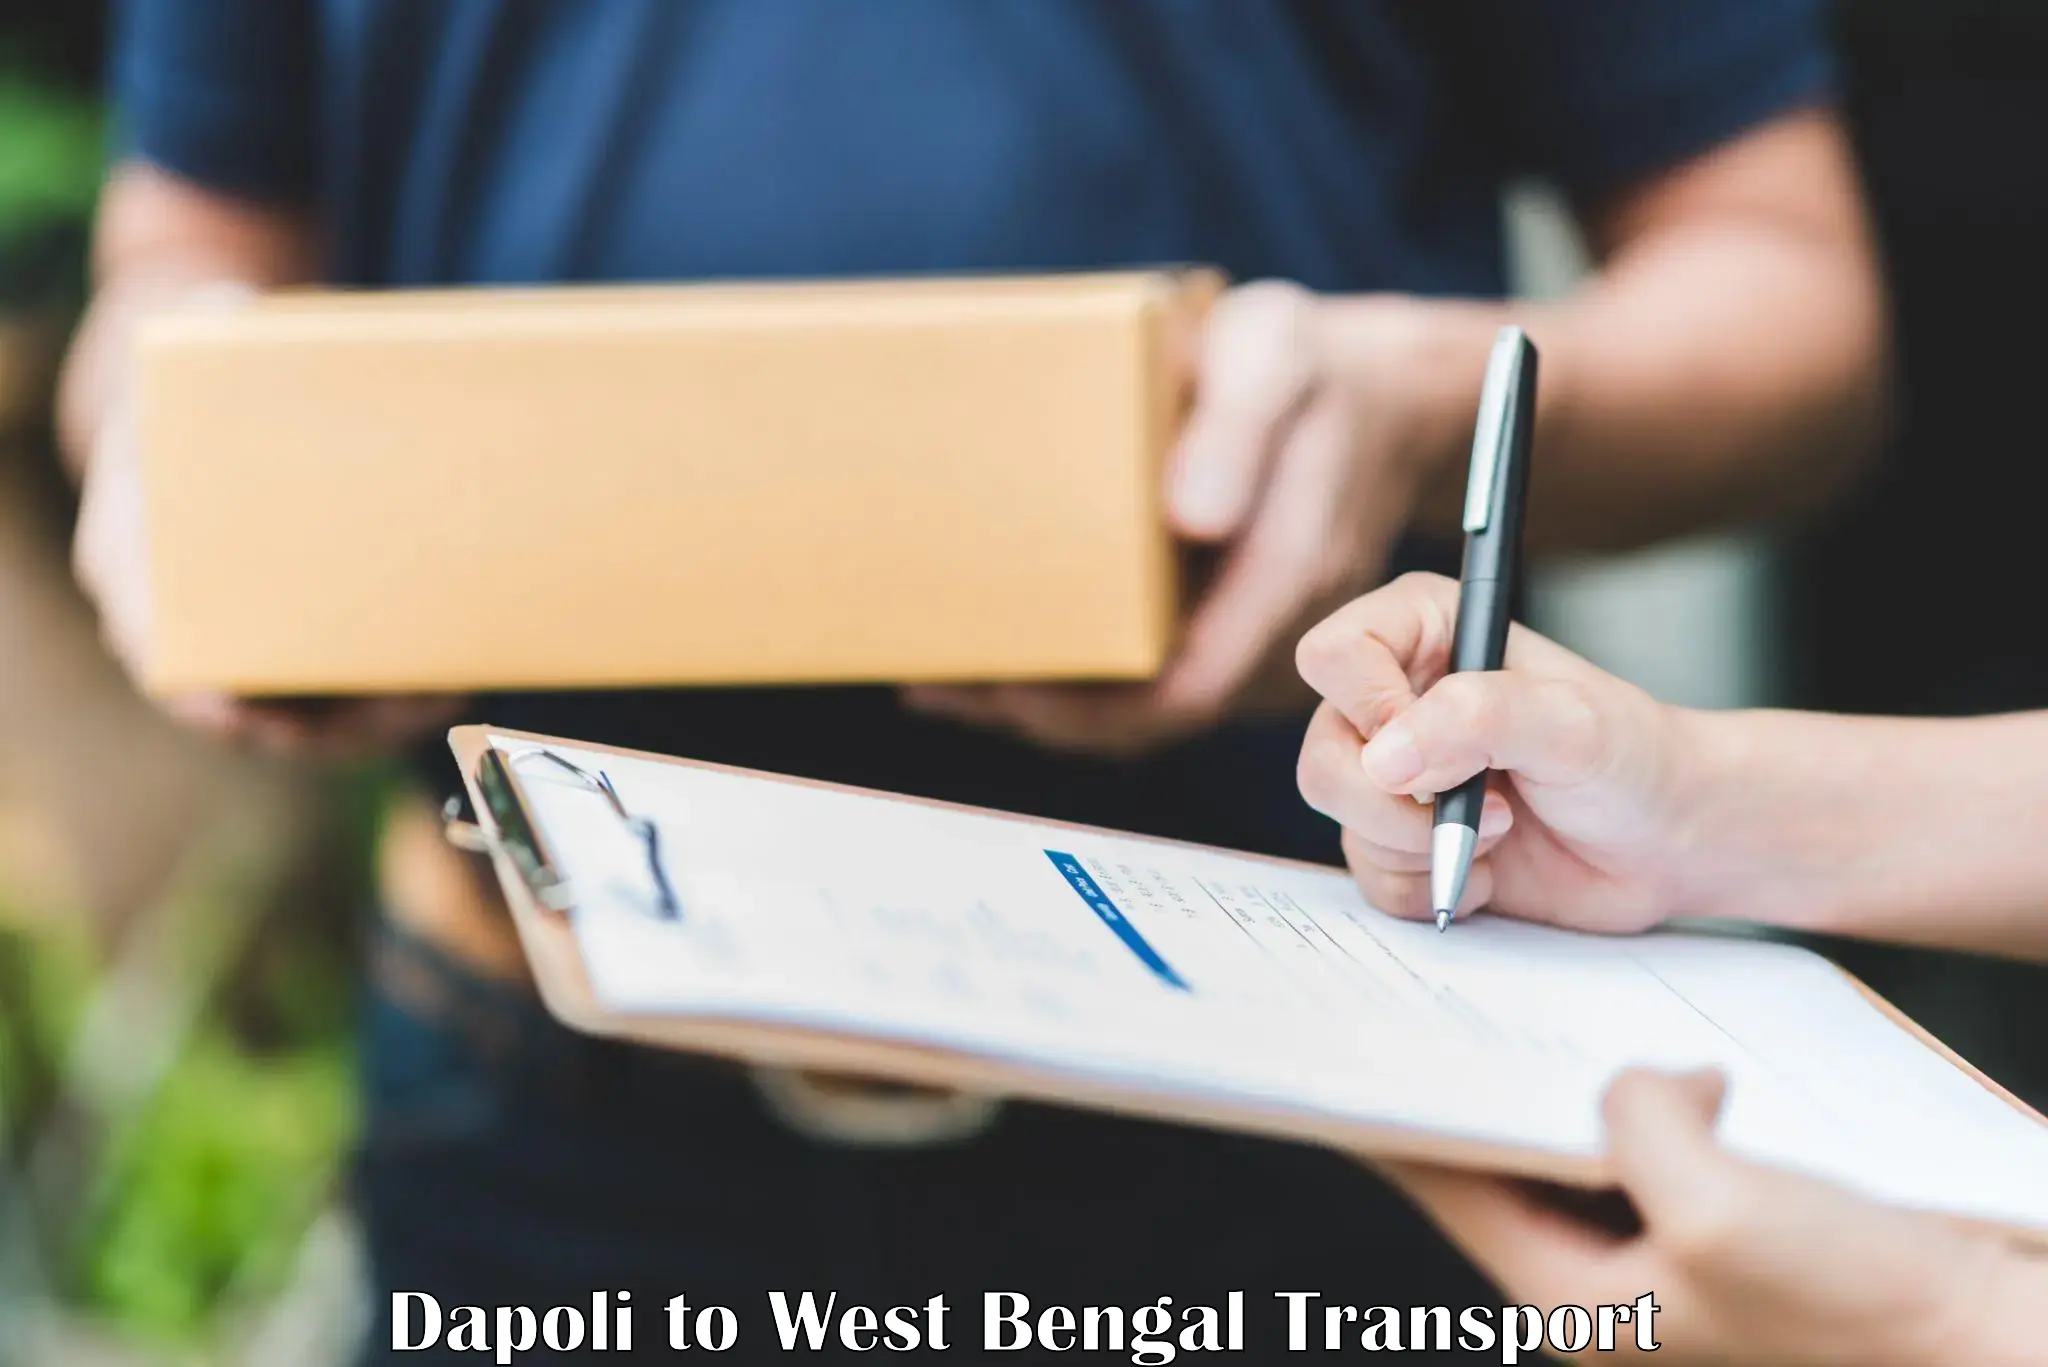 Furniture transport service Dapoli to Ranaghat